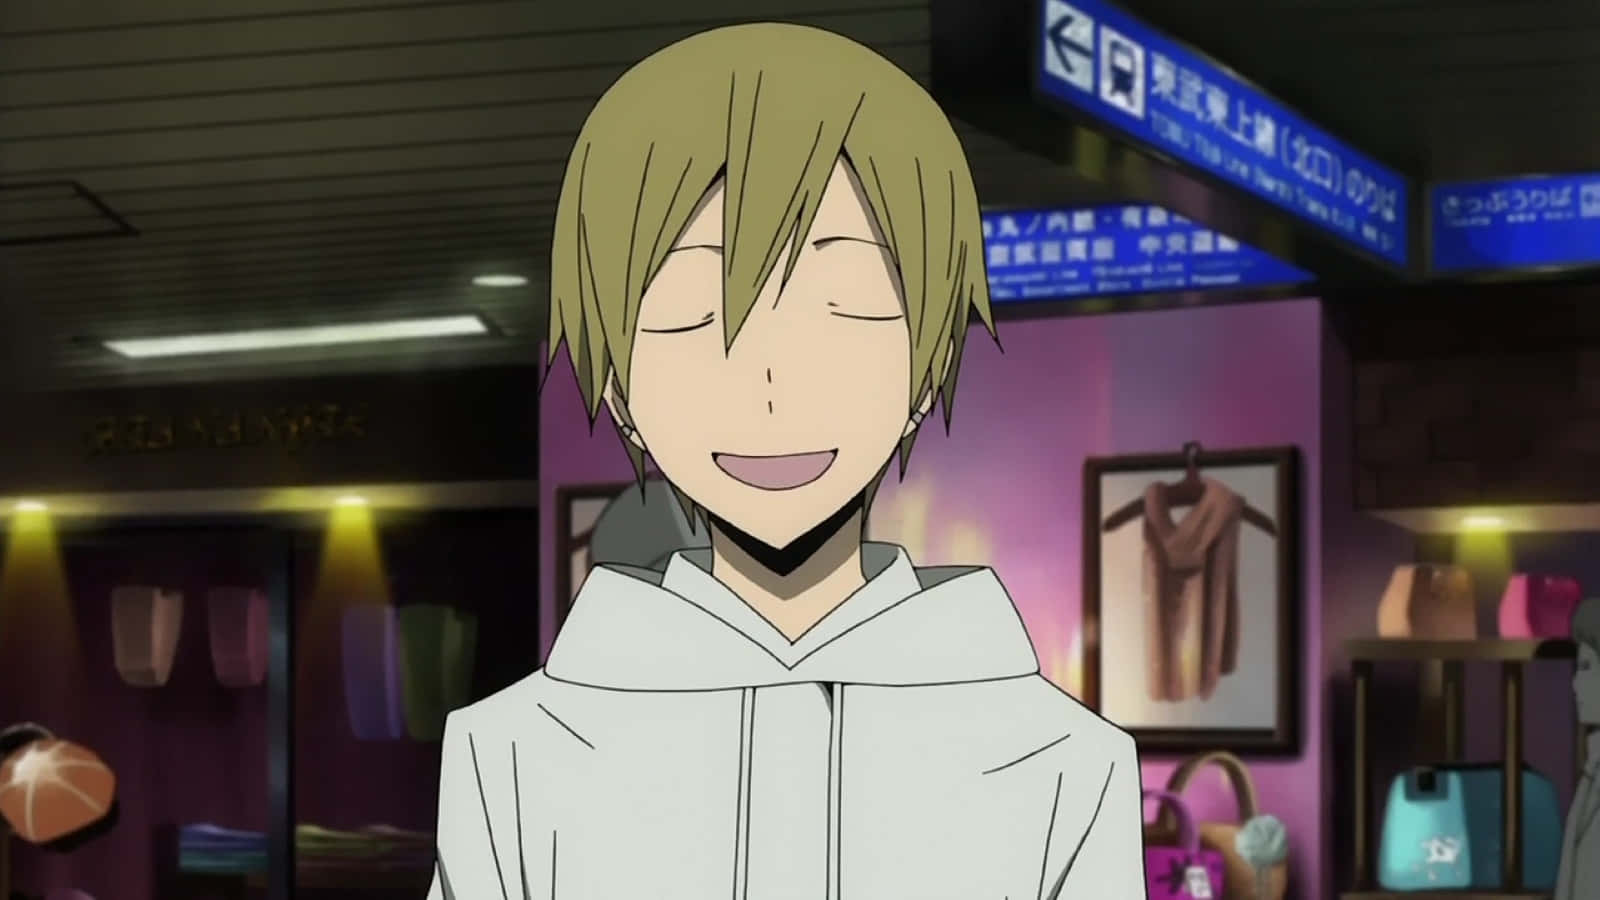 Masaomi Kida smirking and showing off his iconic style. Wallpaper